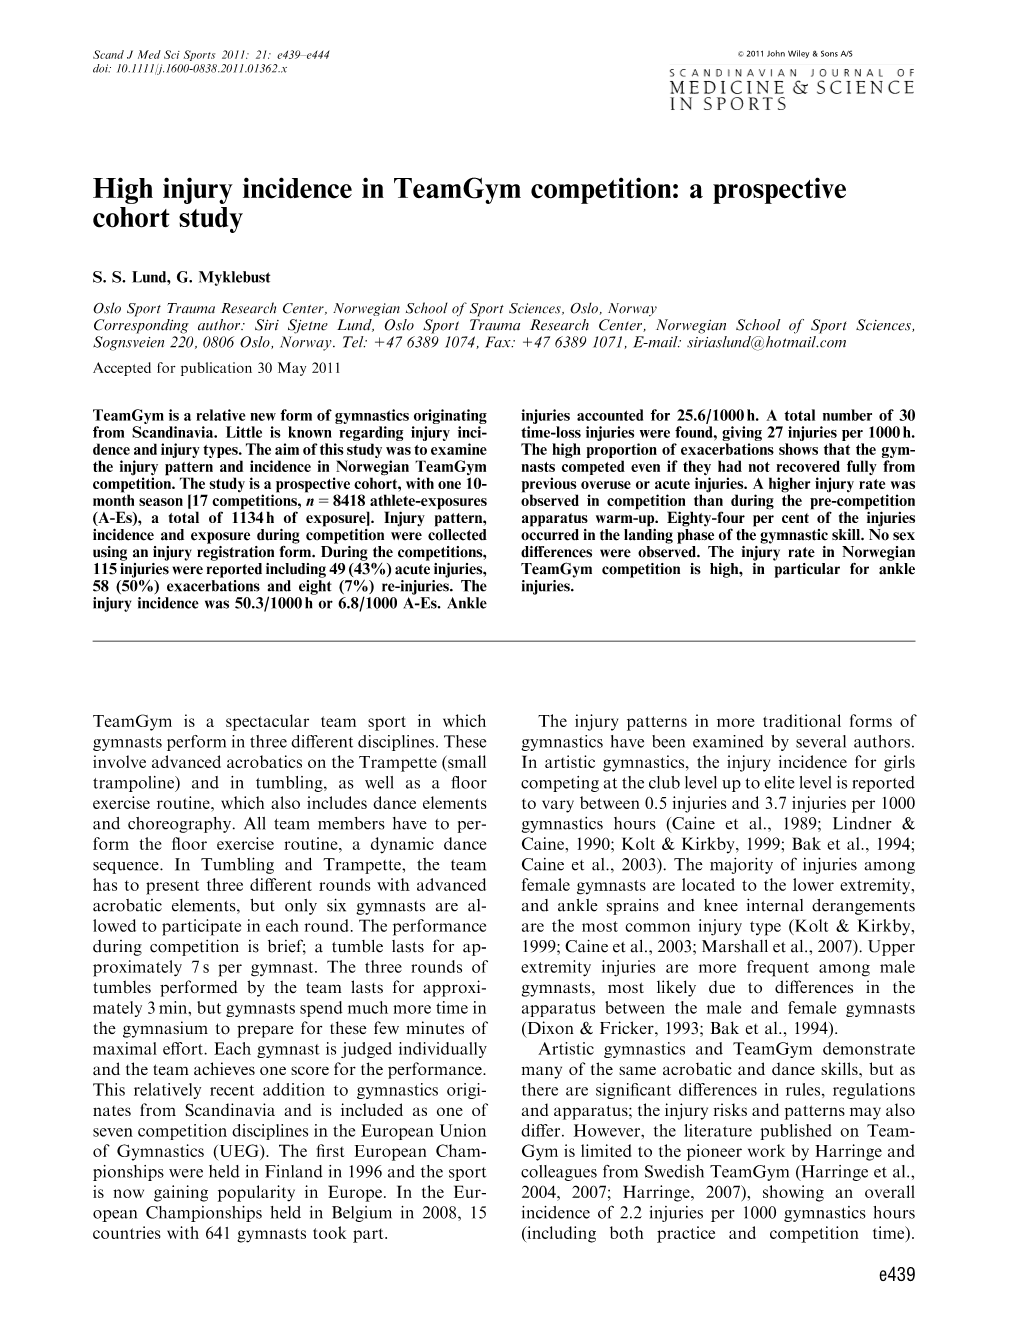 High Injury Incidence in Teamgym Competition: a Prospective Cohort Study